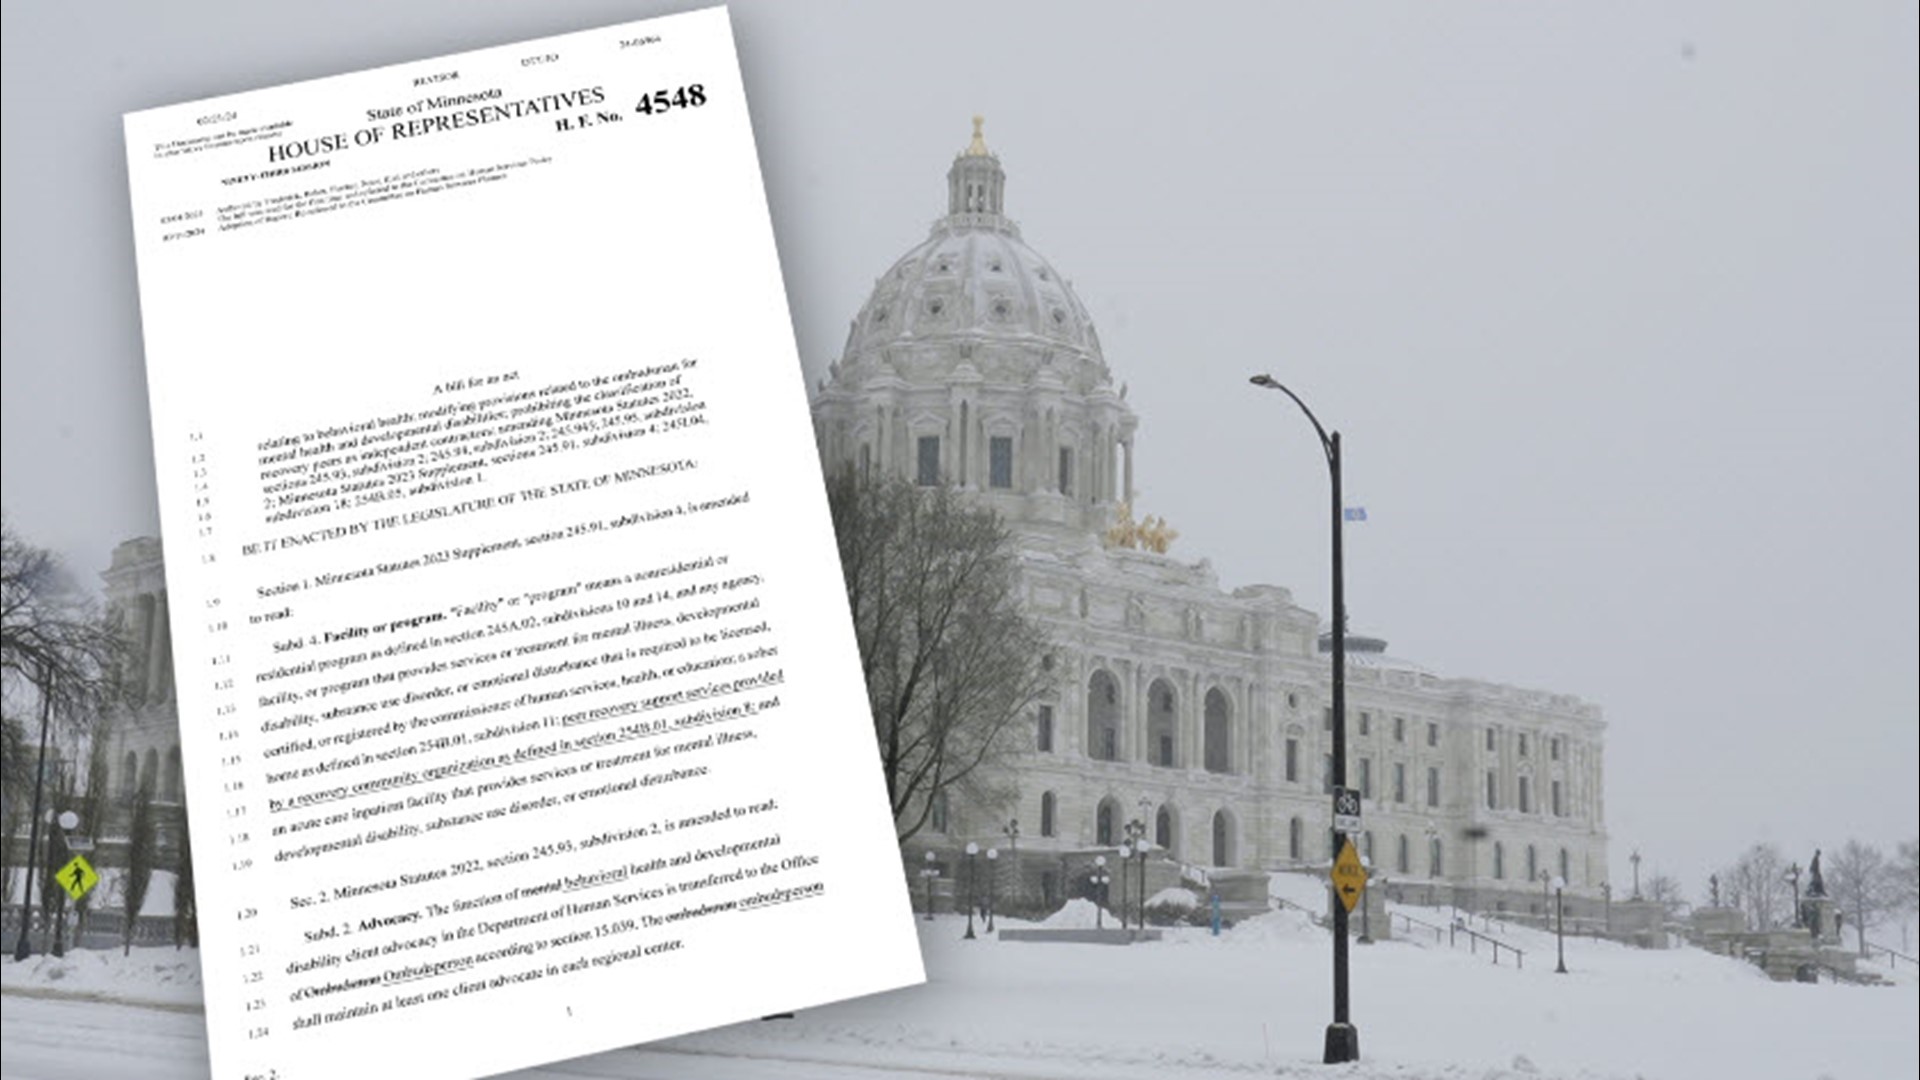 Proposed reforms were introduced in the wake of KARE 11’s investigation that exposed allegations taxpayers were overbilled by recovery providers.